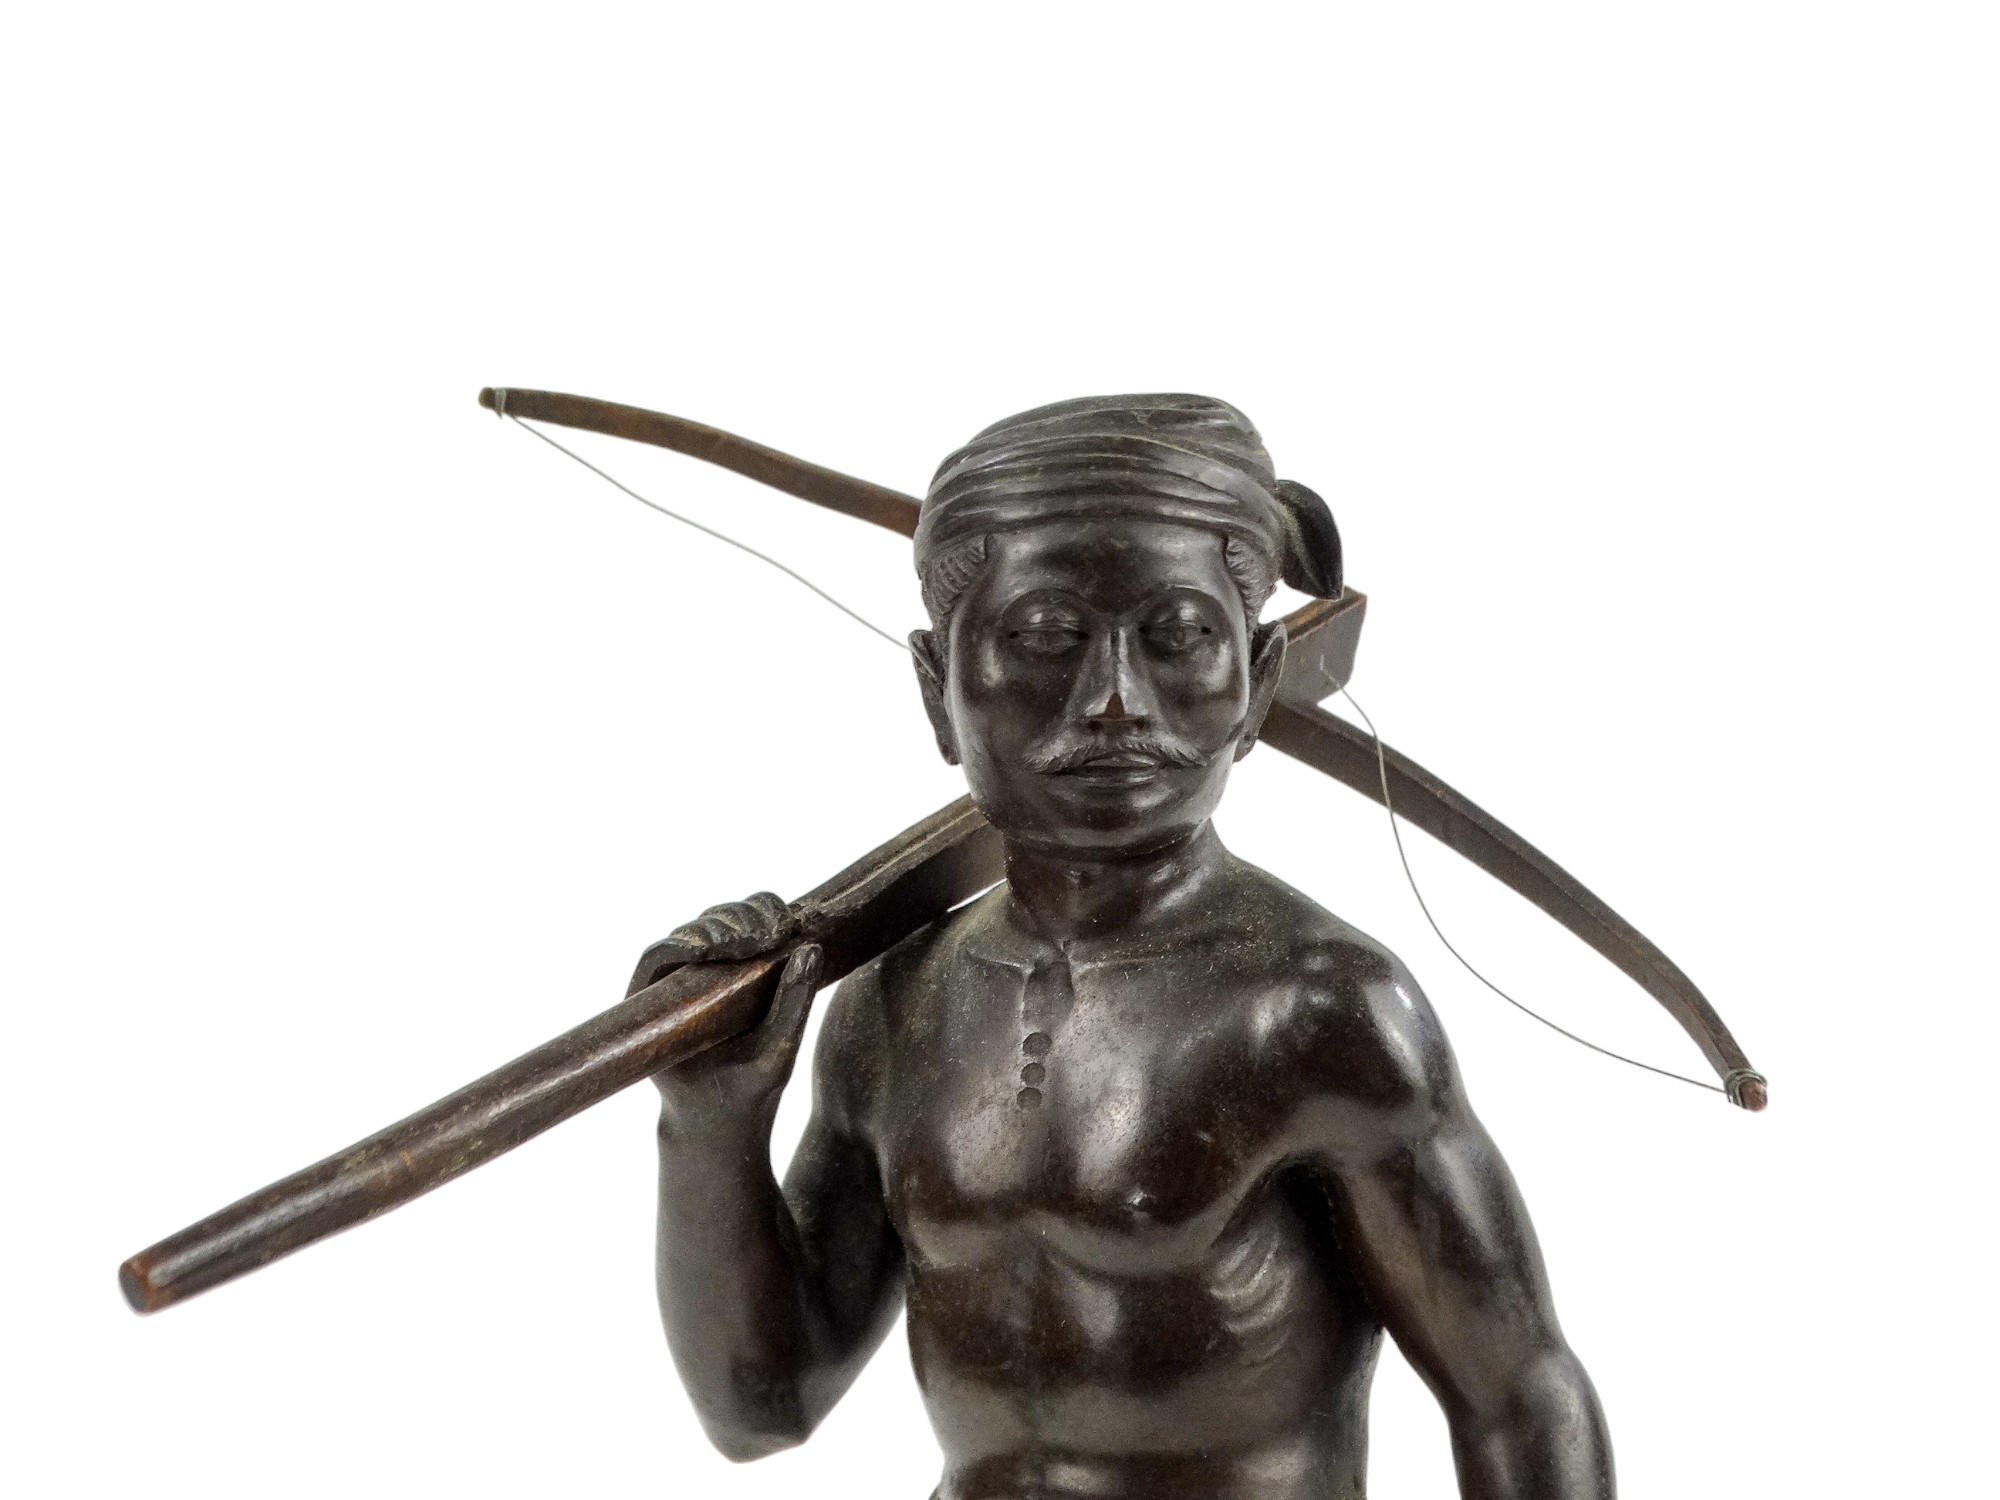 McTha Din 20th century Burmese Pegu bronze figure - standing holding a crossbow, signed to base, - Image 5 of 5